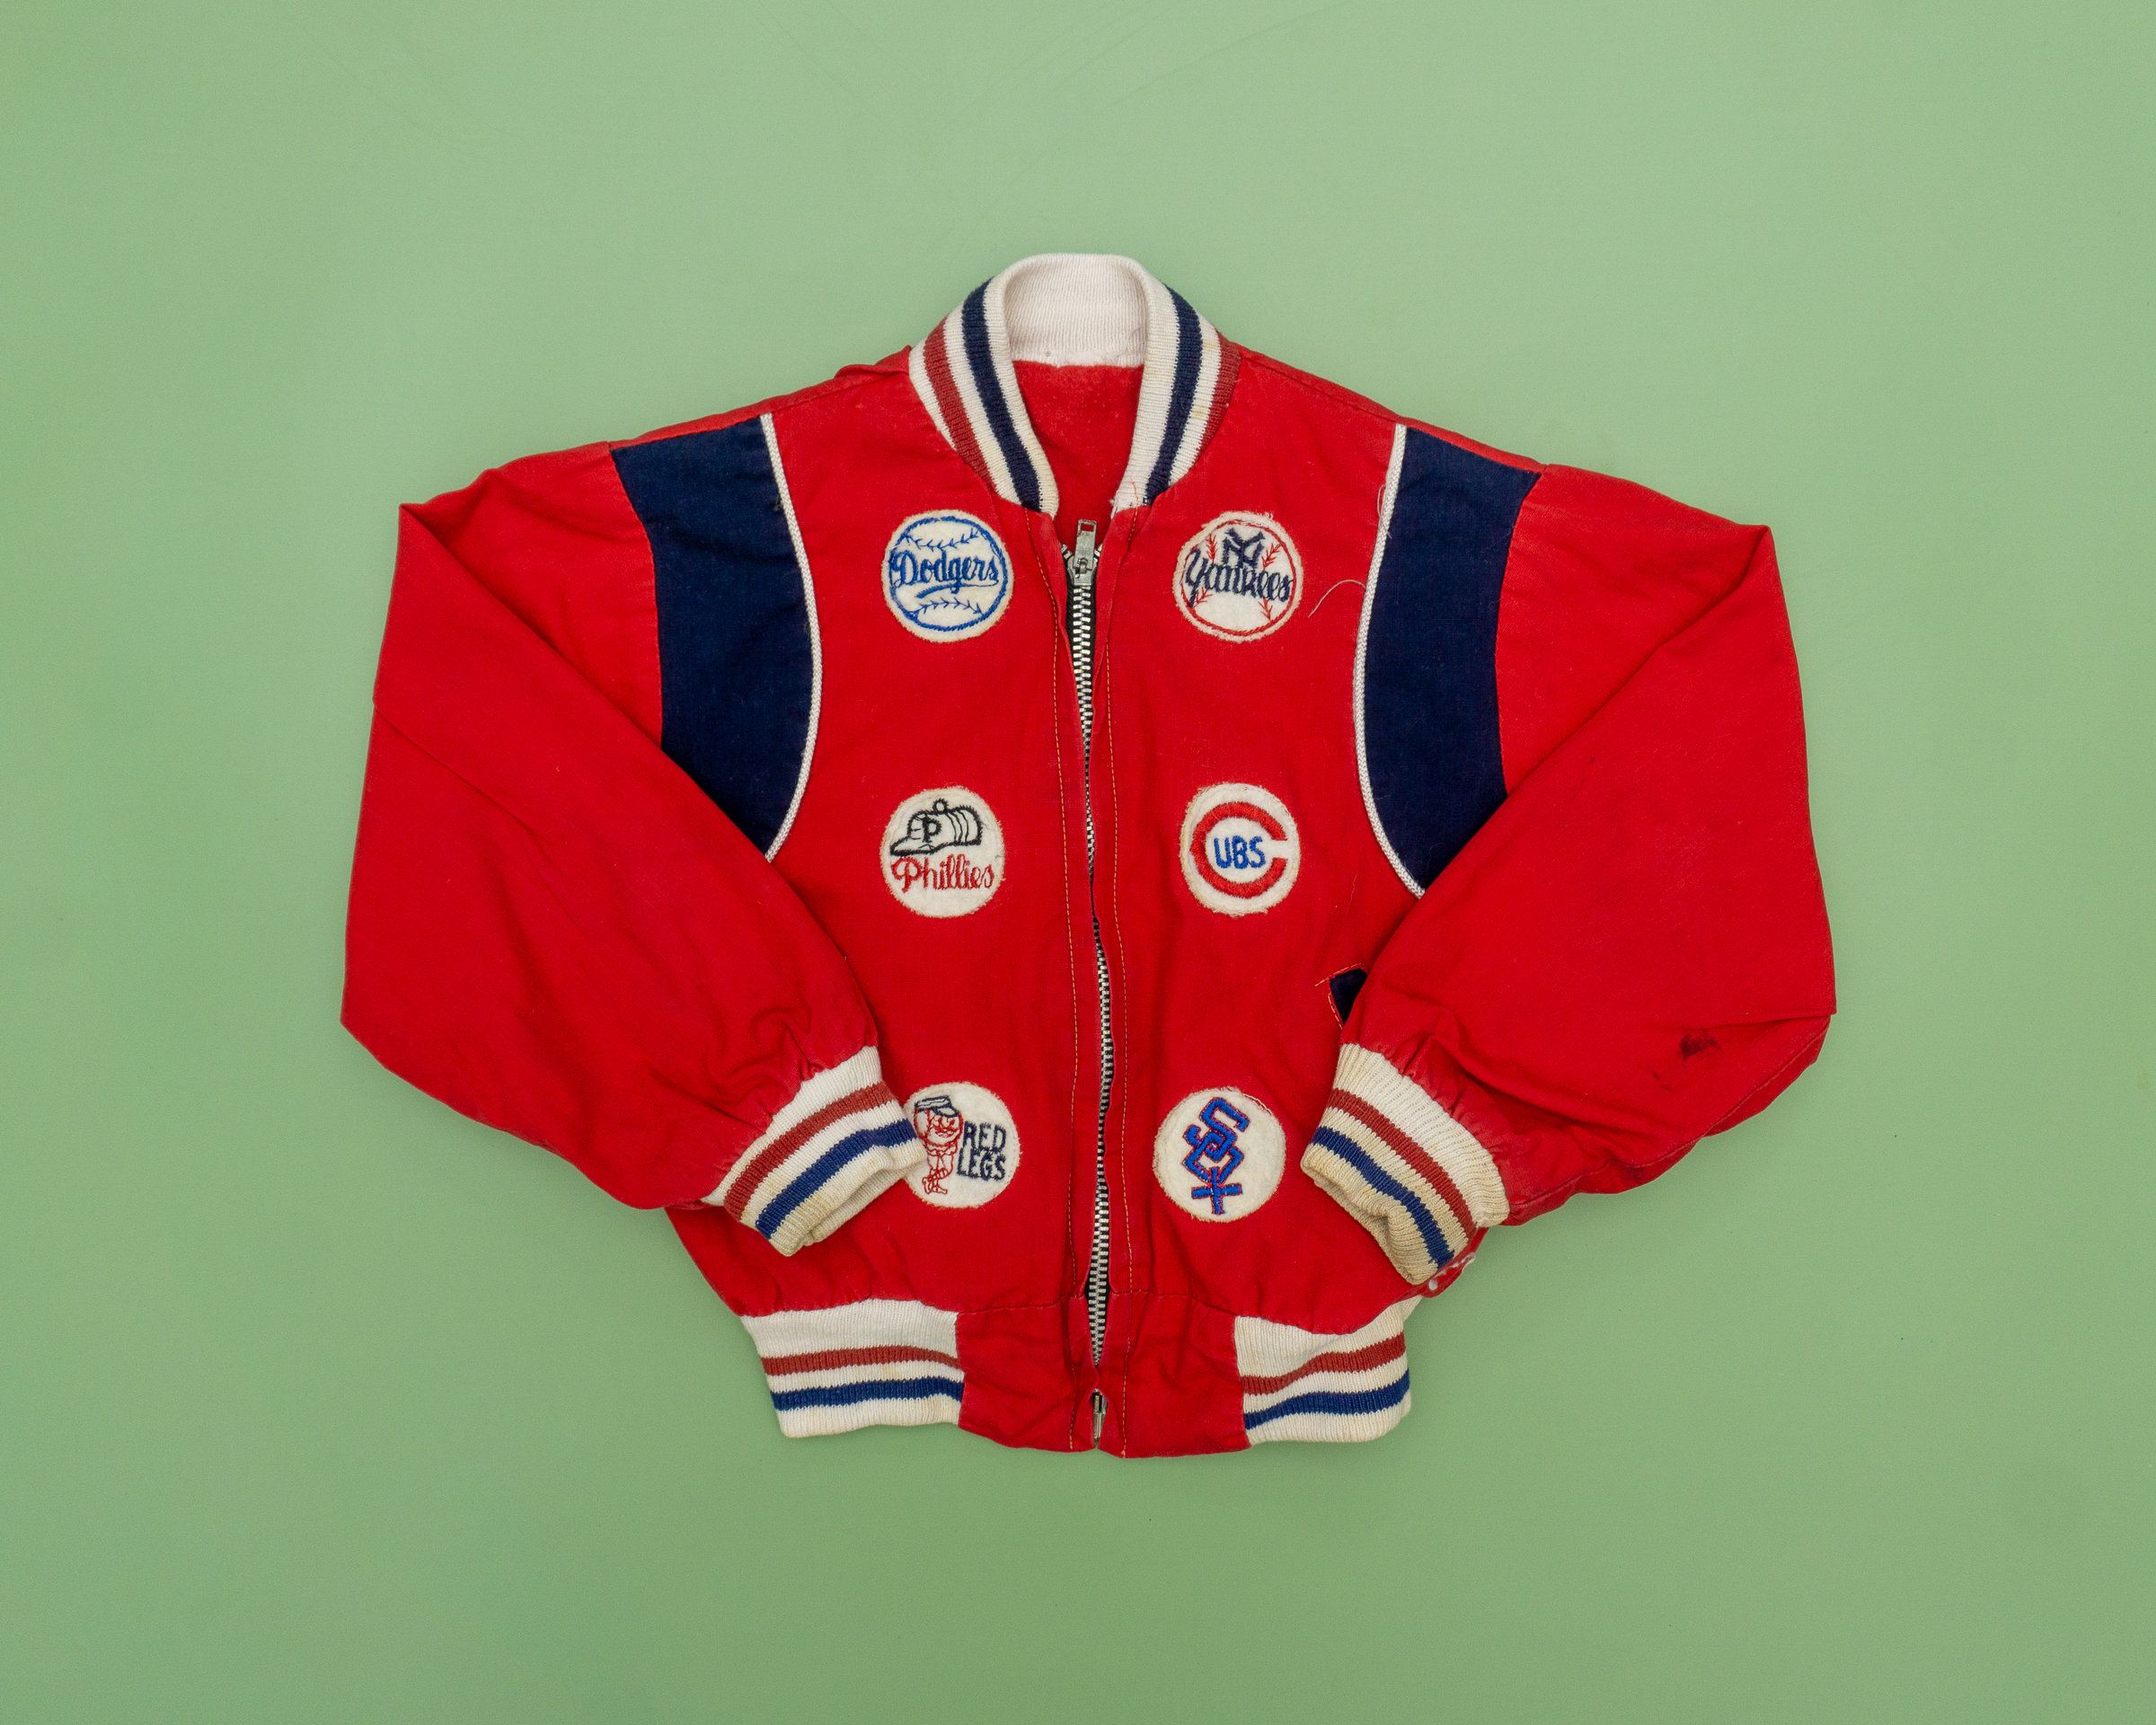 60s Vintage Kids MLB Baseball Jacket With All Over Patches 